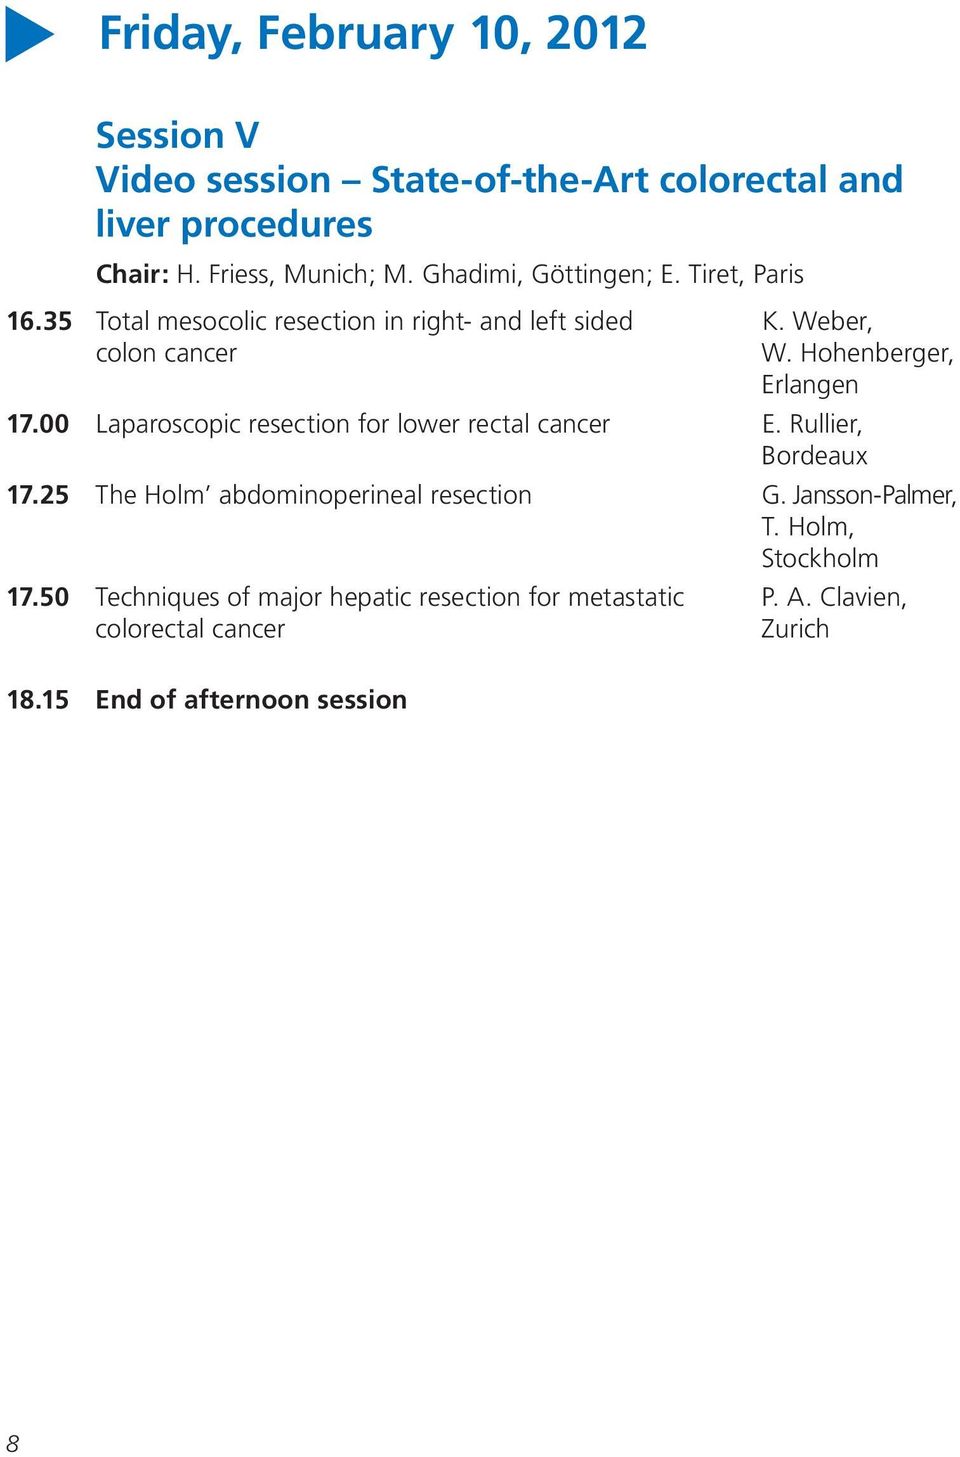 Hohenberger, Erlangen 17.00 Laparoscopic resection for lower rectal cancer E. Rullier, Bordeaux 17.